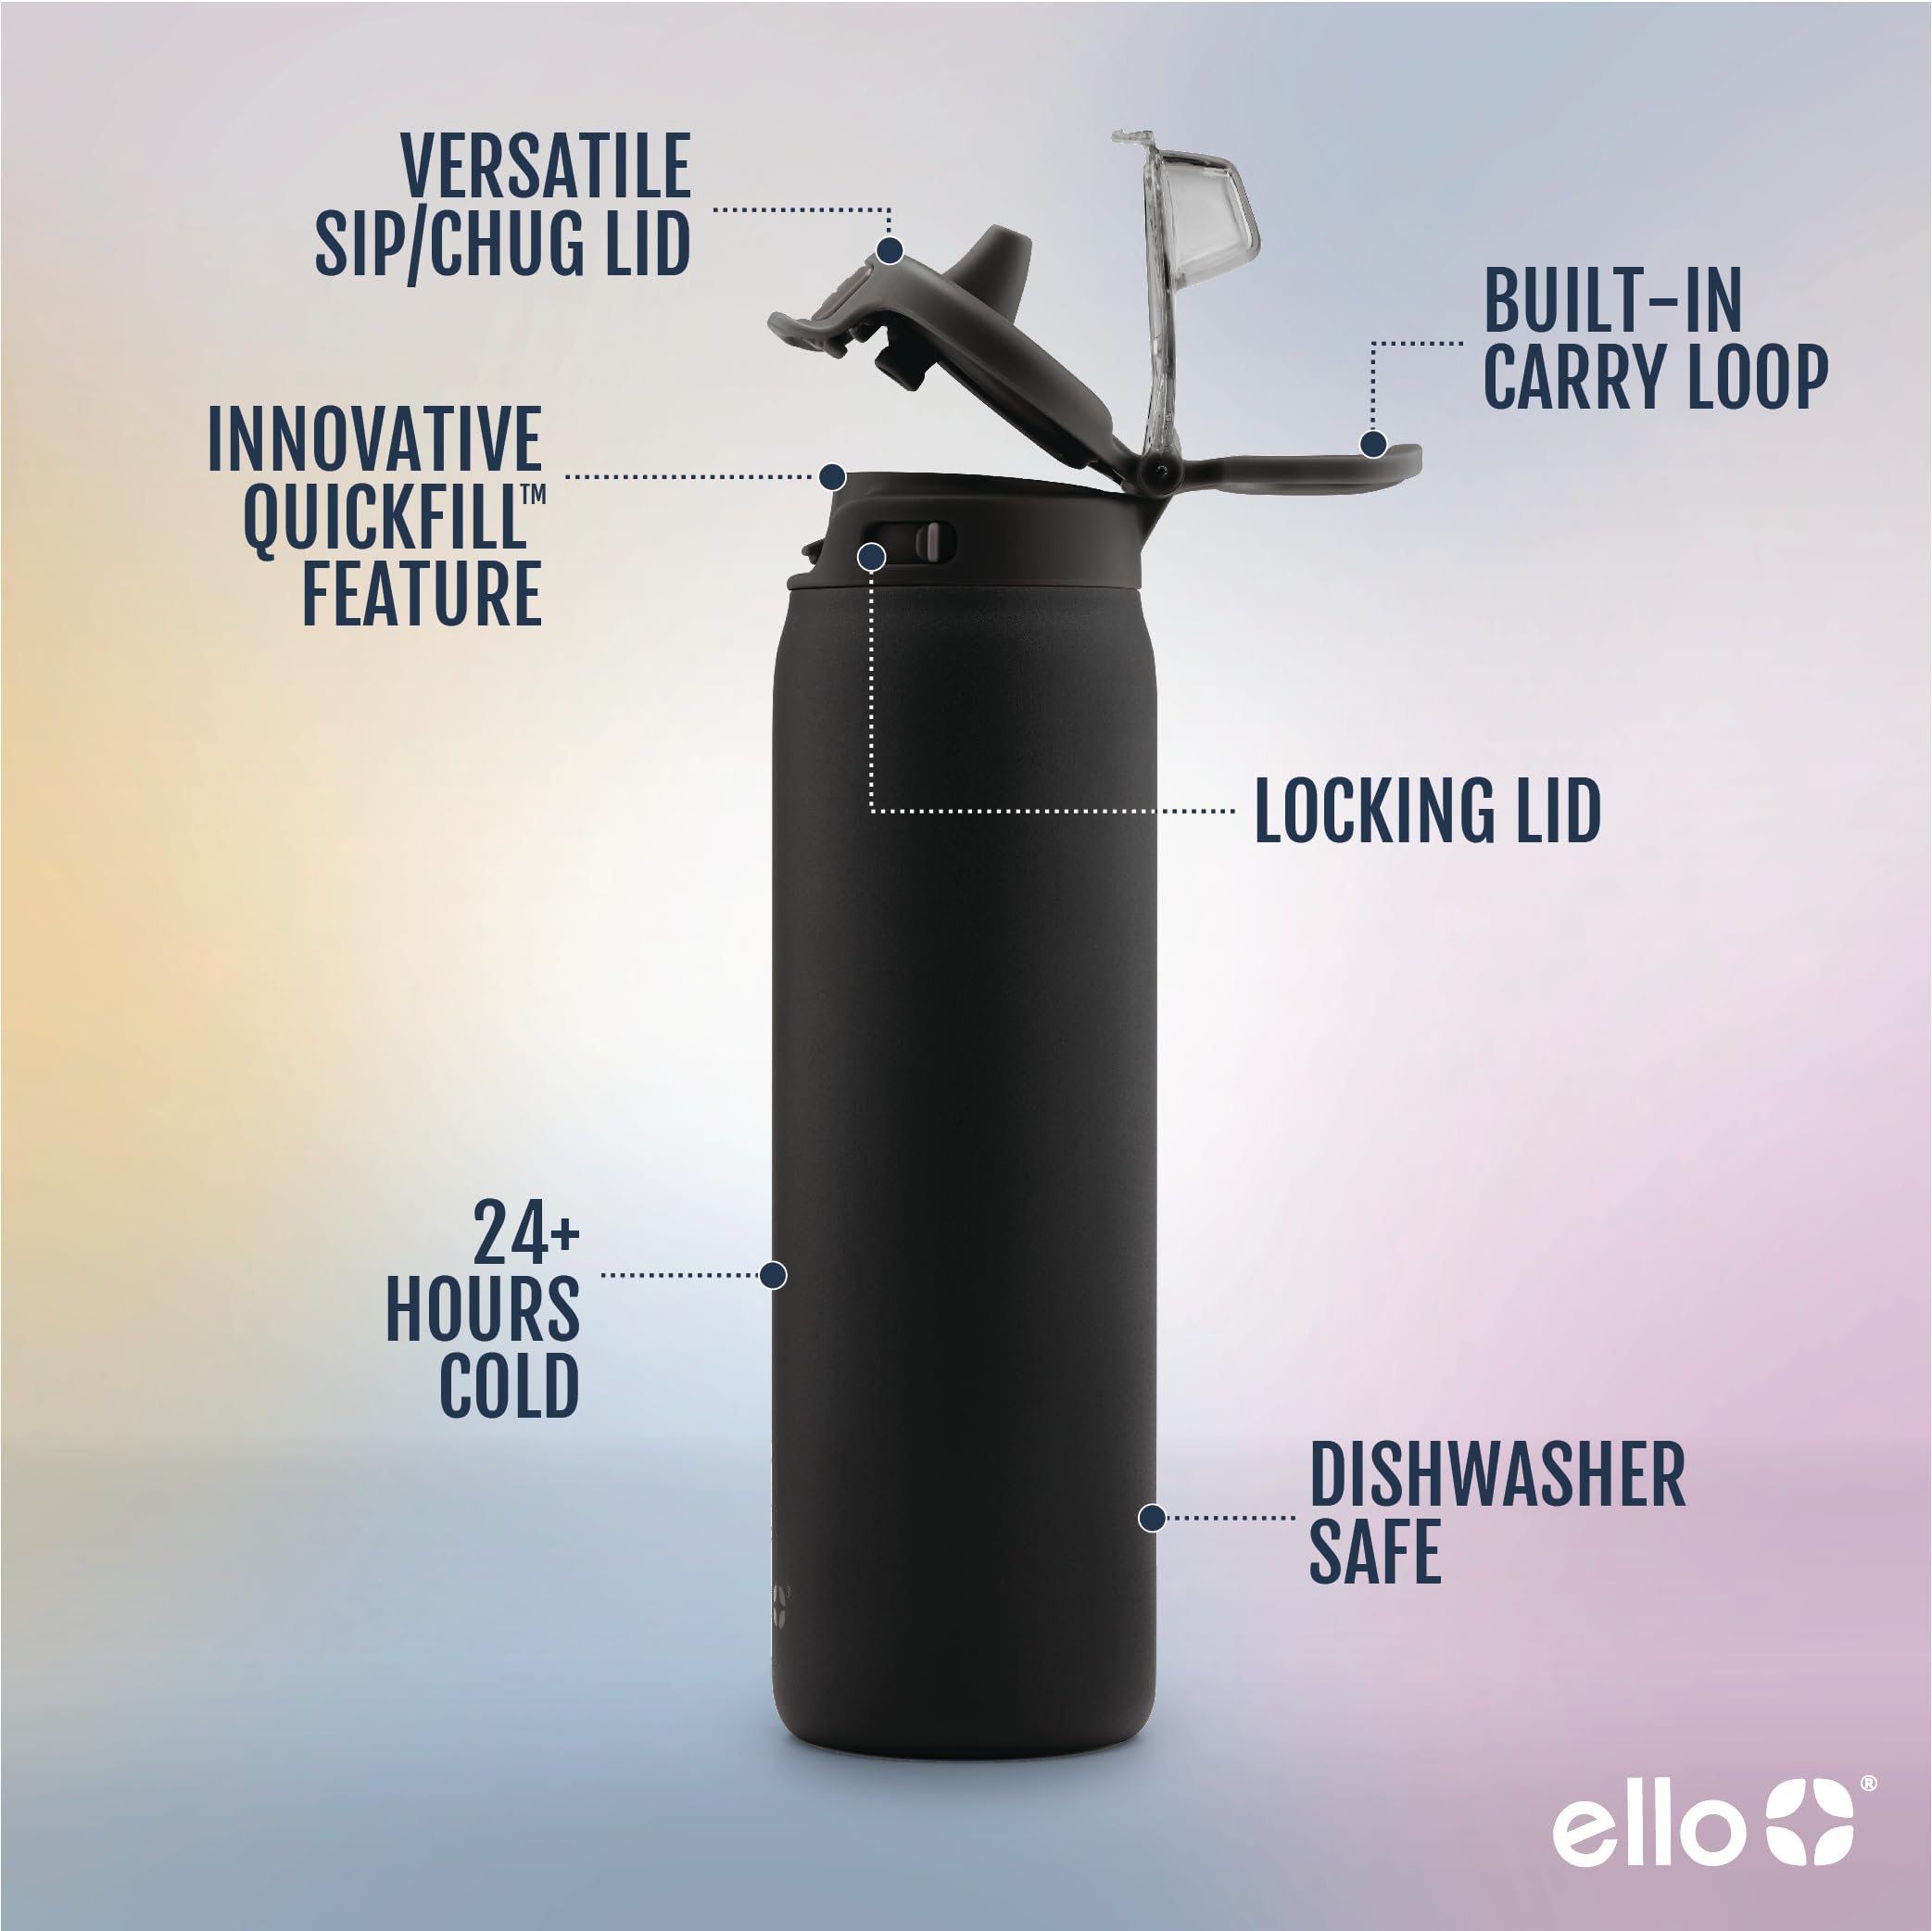 Ello Pop & Fill Stainless Steel Water Bottle with QuickFill Technology | Double Walled Vacuum Insulated Metal | Leak Proof Locking Lid | Sip and Chug | Reusable BPA Free | 22oz, 32oz